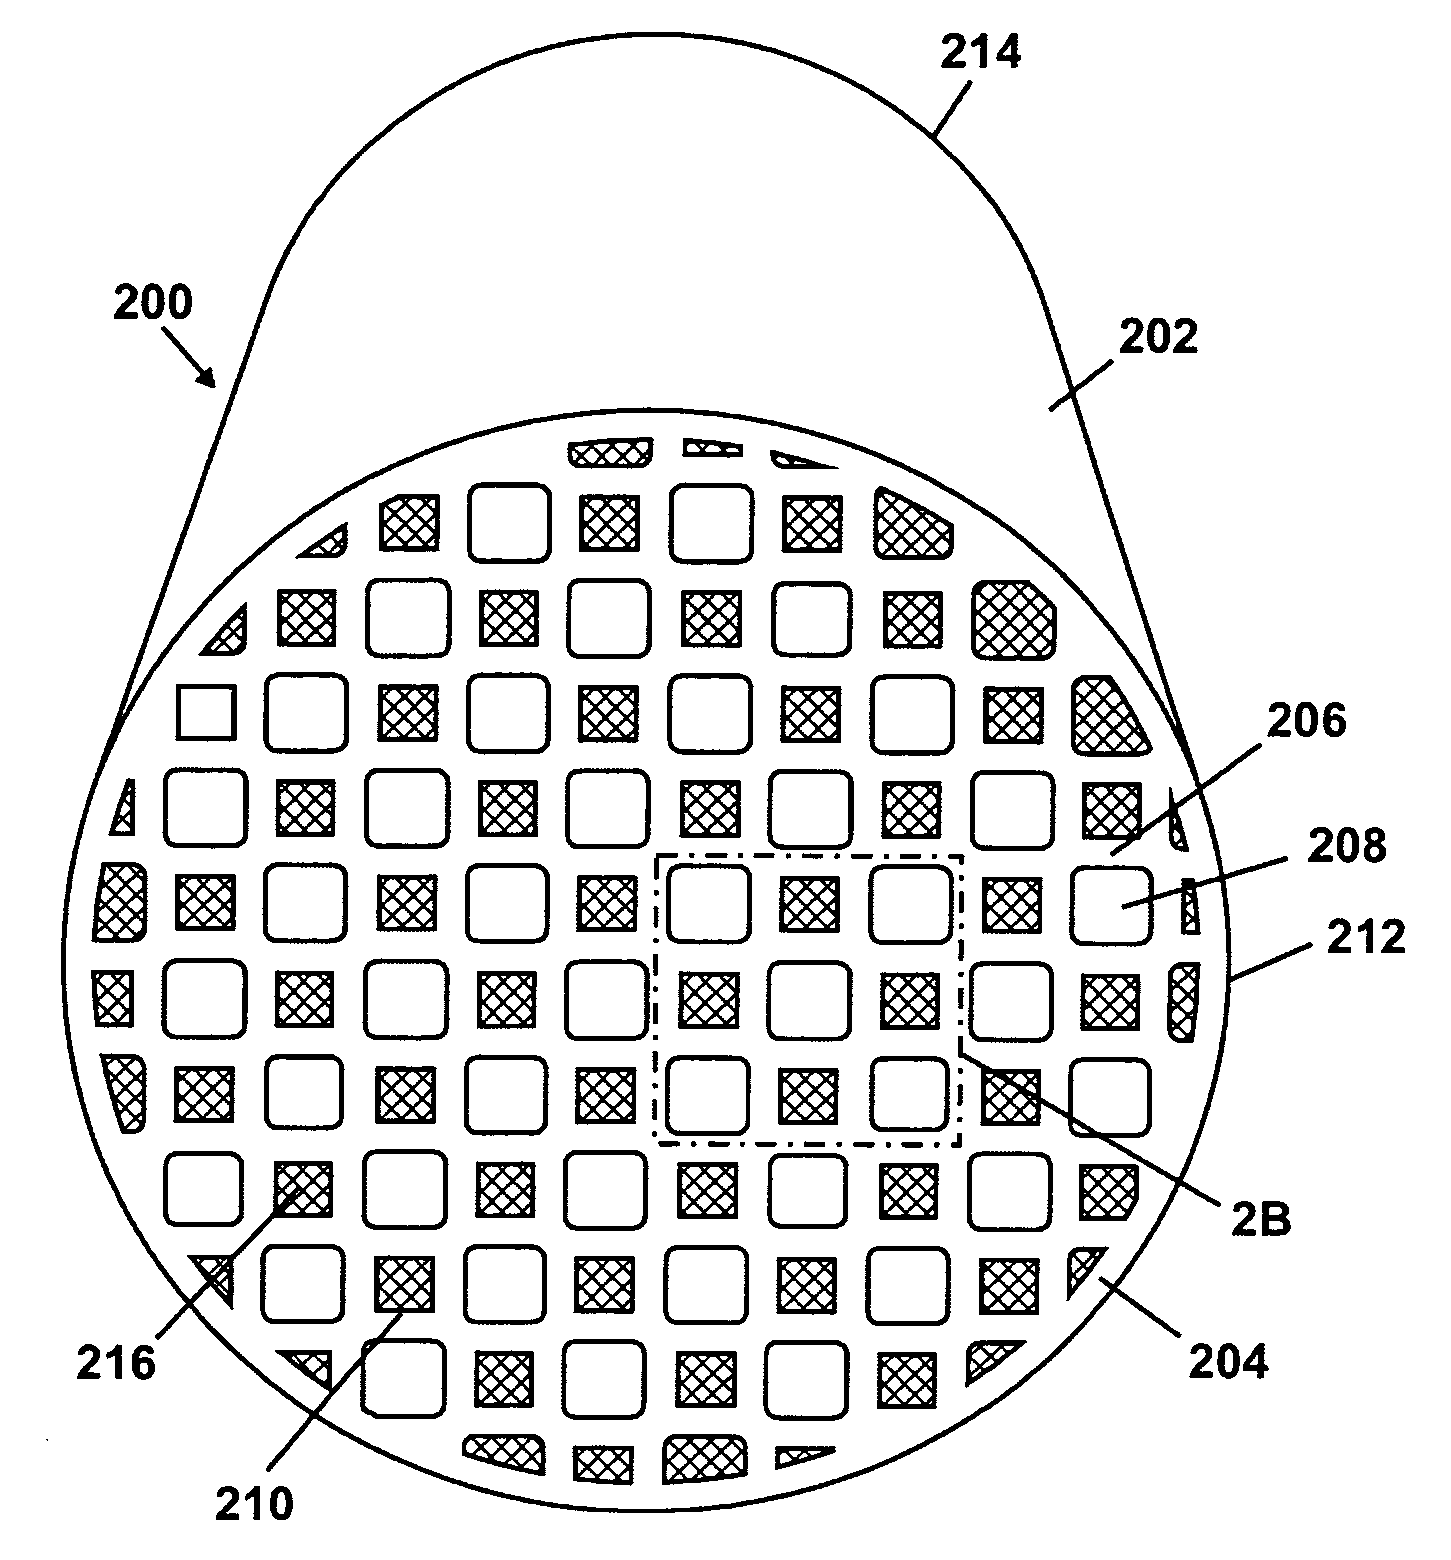 Asymmetric honeycomb wall-flow filter having improved structural strength